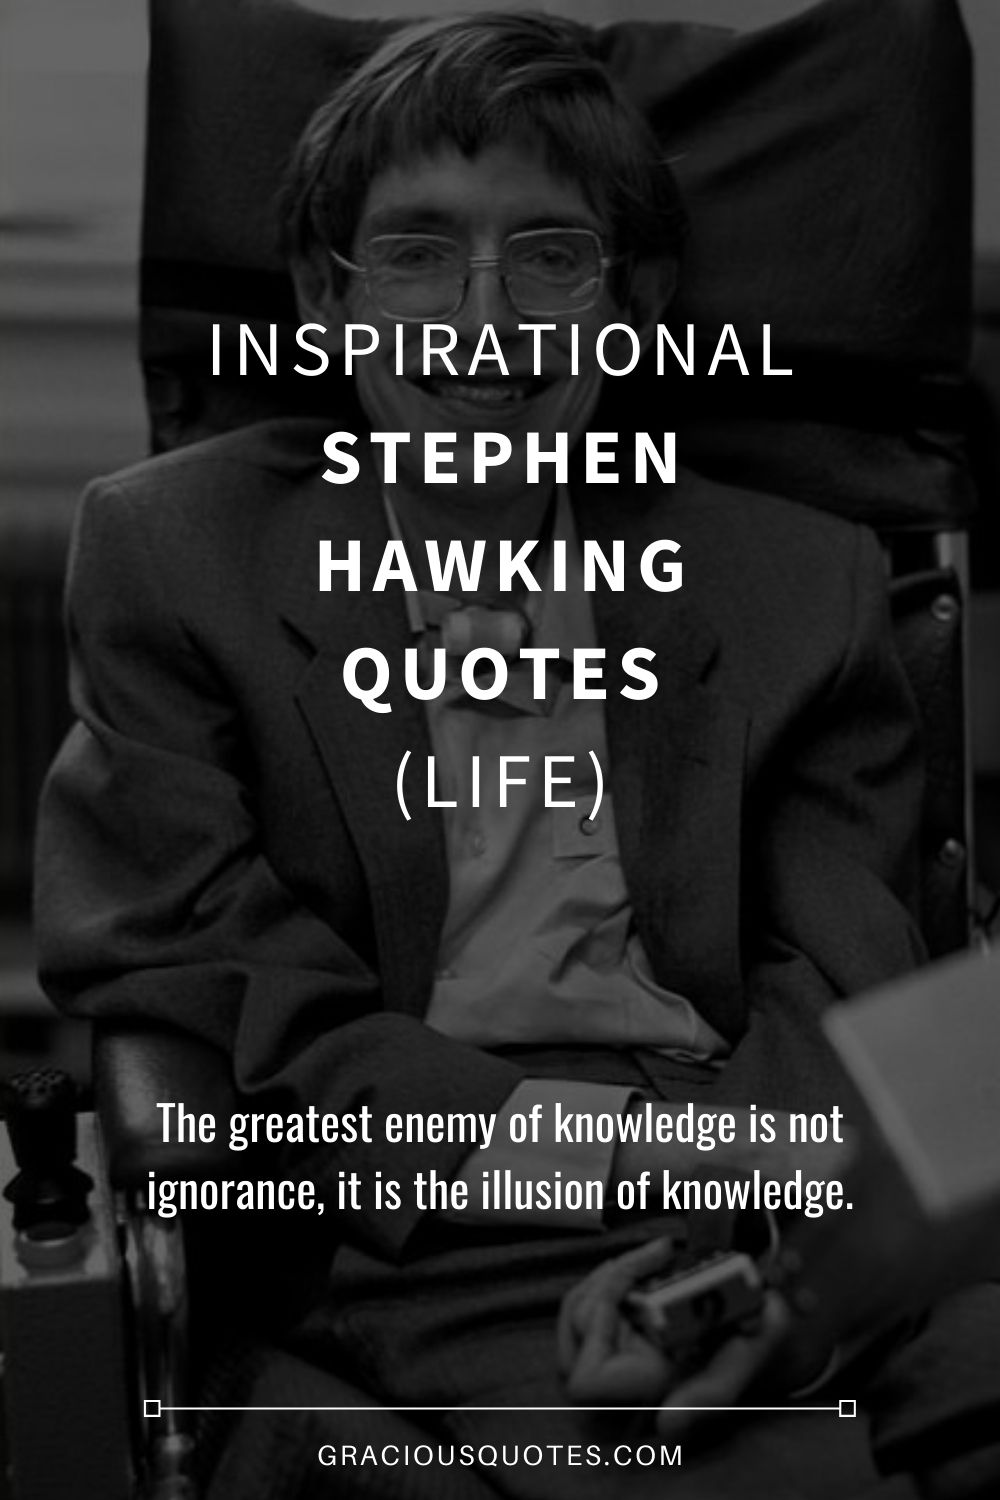 Inspirational Stephen Hawking Quotes (LIFE) - Gracious Quotes